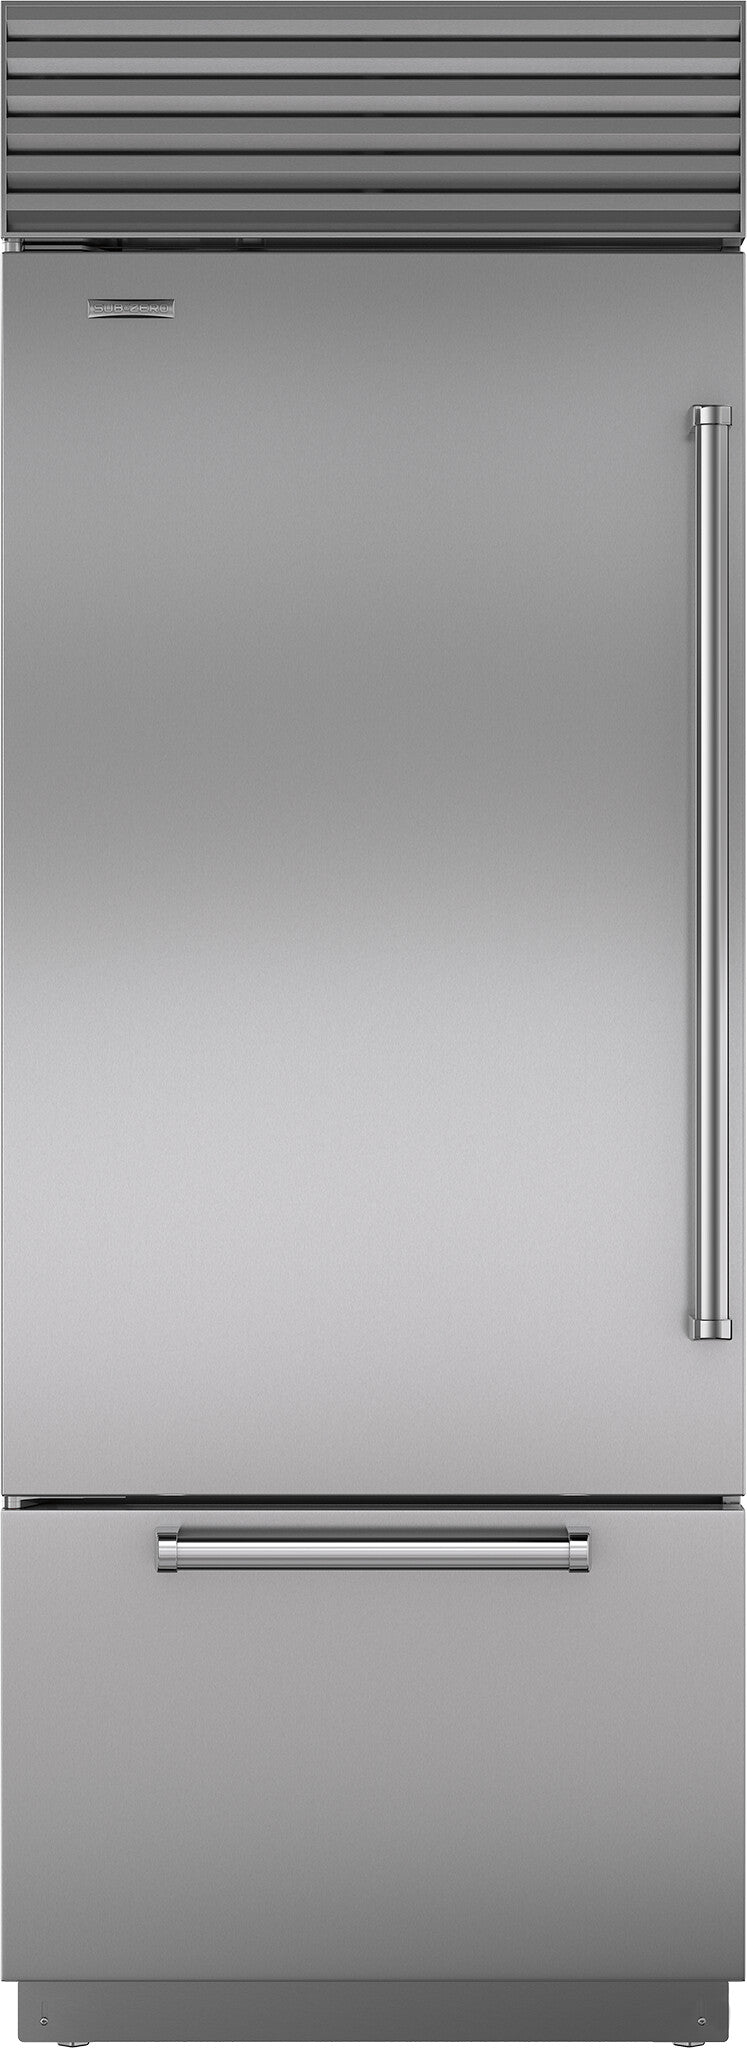 Sub-Zero - 30 Inch 17 cu. ft Built In / Integrated Bottom Mount Refrigerator in Stainless - CL3050UID/S/P/L